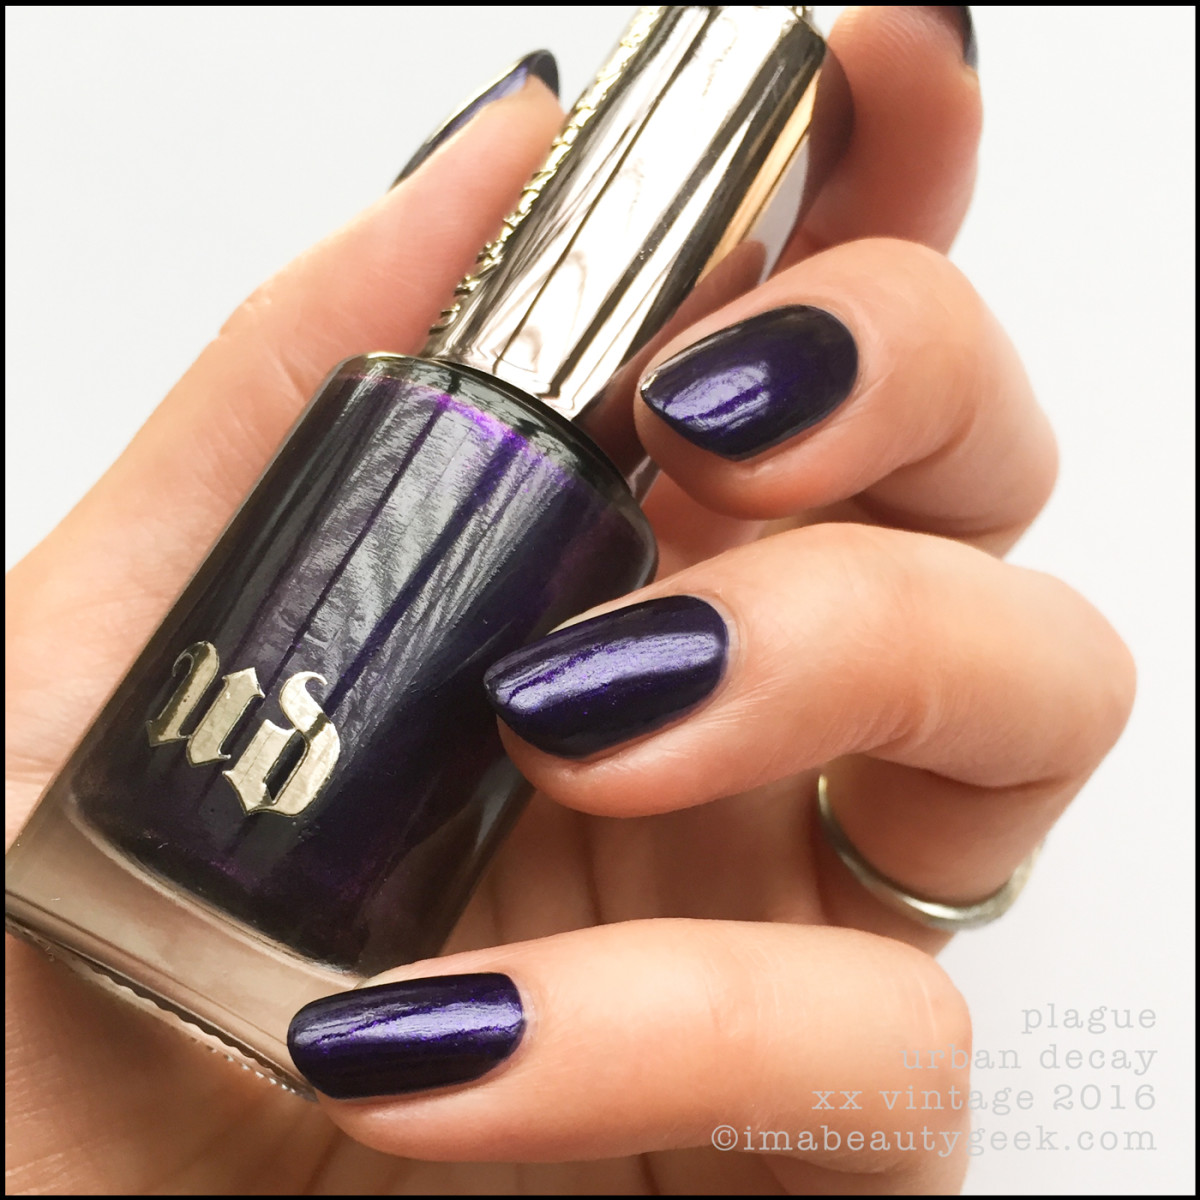 URBAN DECAY XX VINTAGE NAIL POLISH COLLECTION SWATCHES & REVIEW -  Beautygeeks